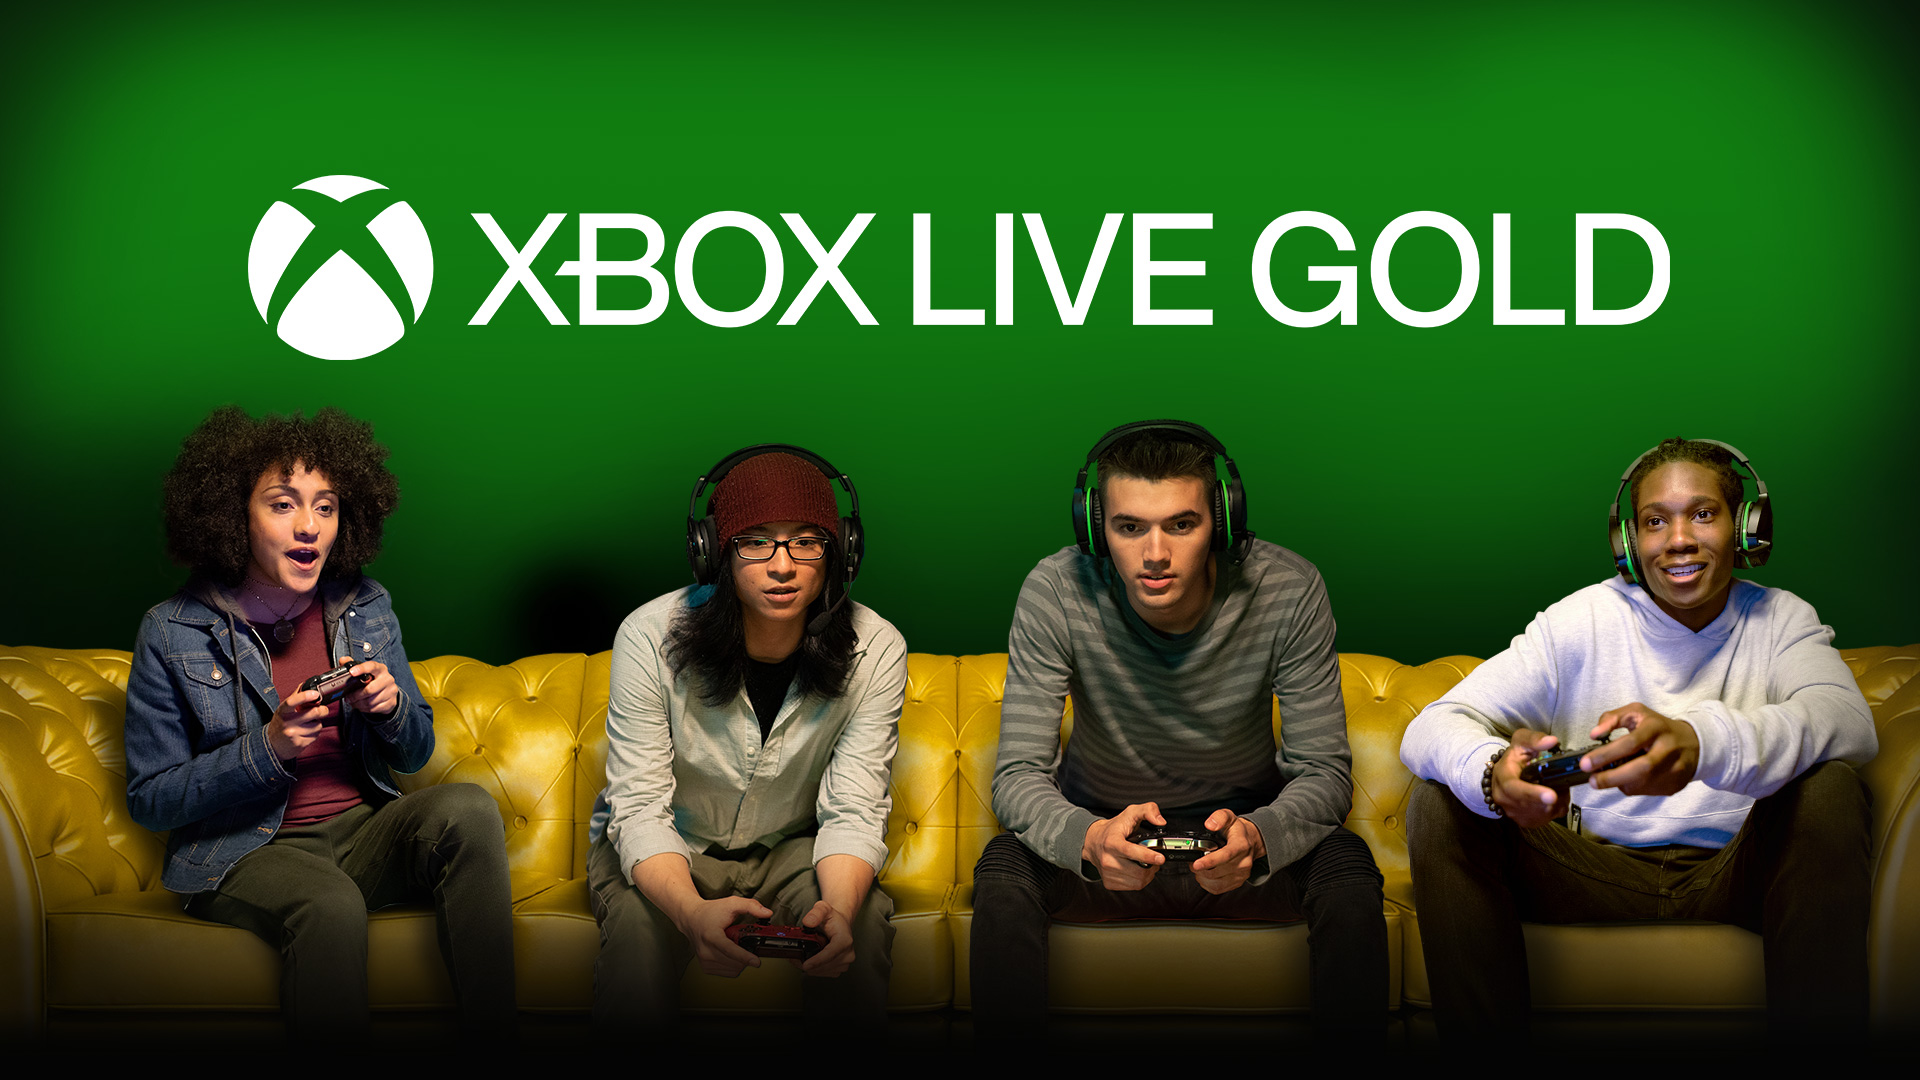 Microsoft No Longer Rising Ticket of Xbox Dwell Gold, Free-to-Play Games No Longer Require Gold